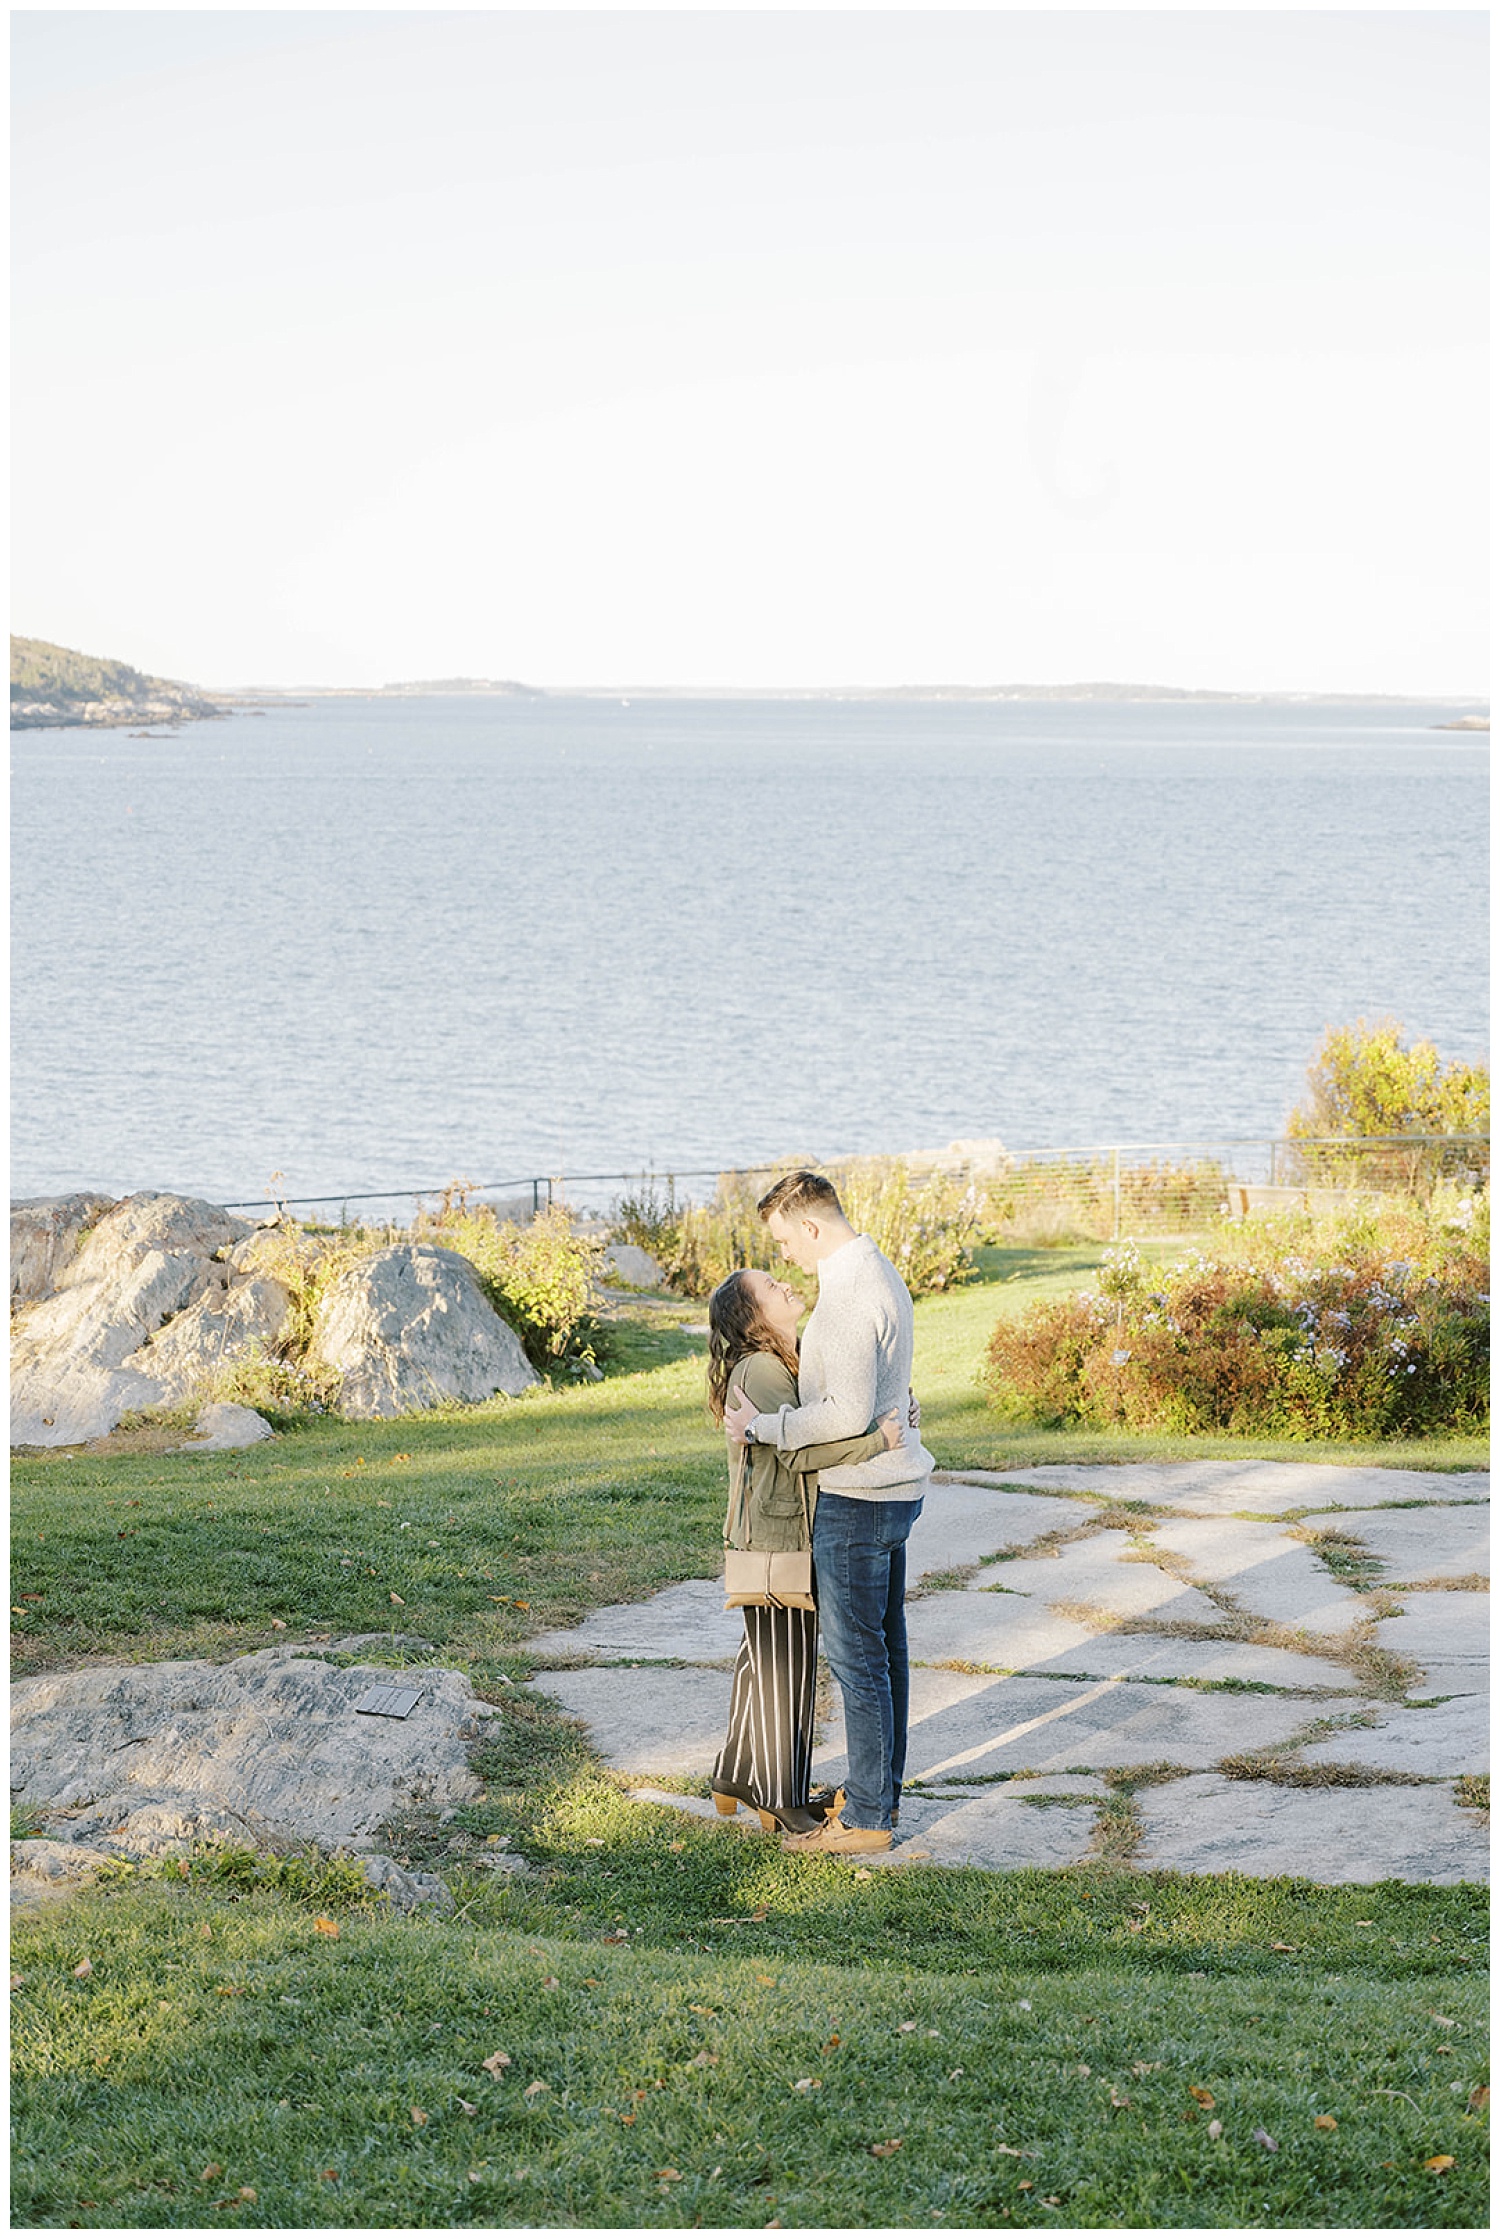 Maine engagement photographer shooting a proposal at Fort Williams Park